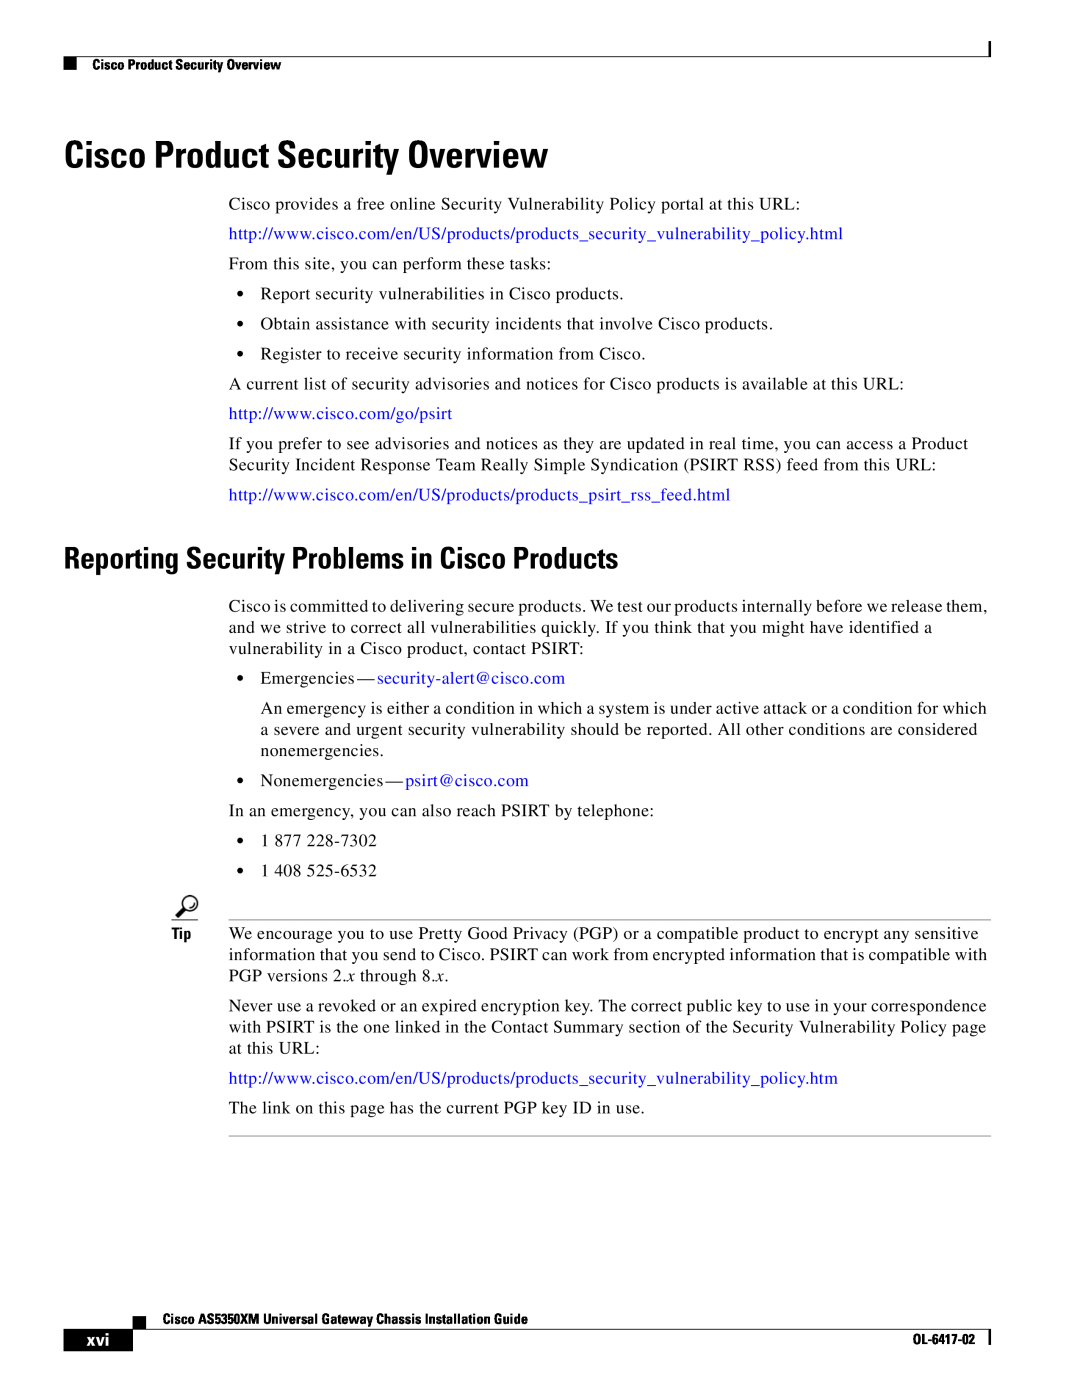 Cisco Systems AS5350XM manual Cisco Product Security Overview, Reporting Security Problems in Cisco Products 